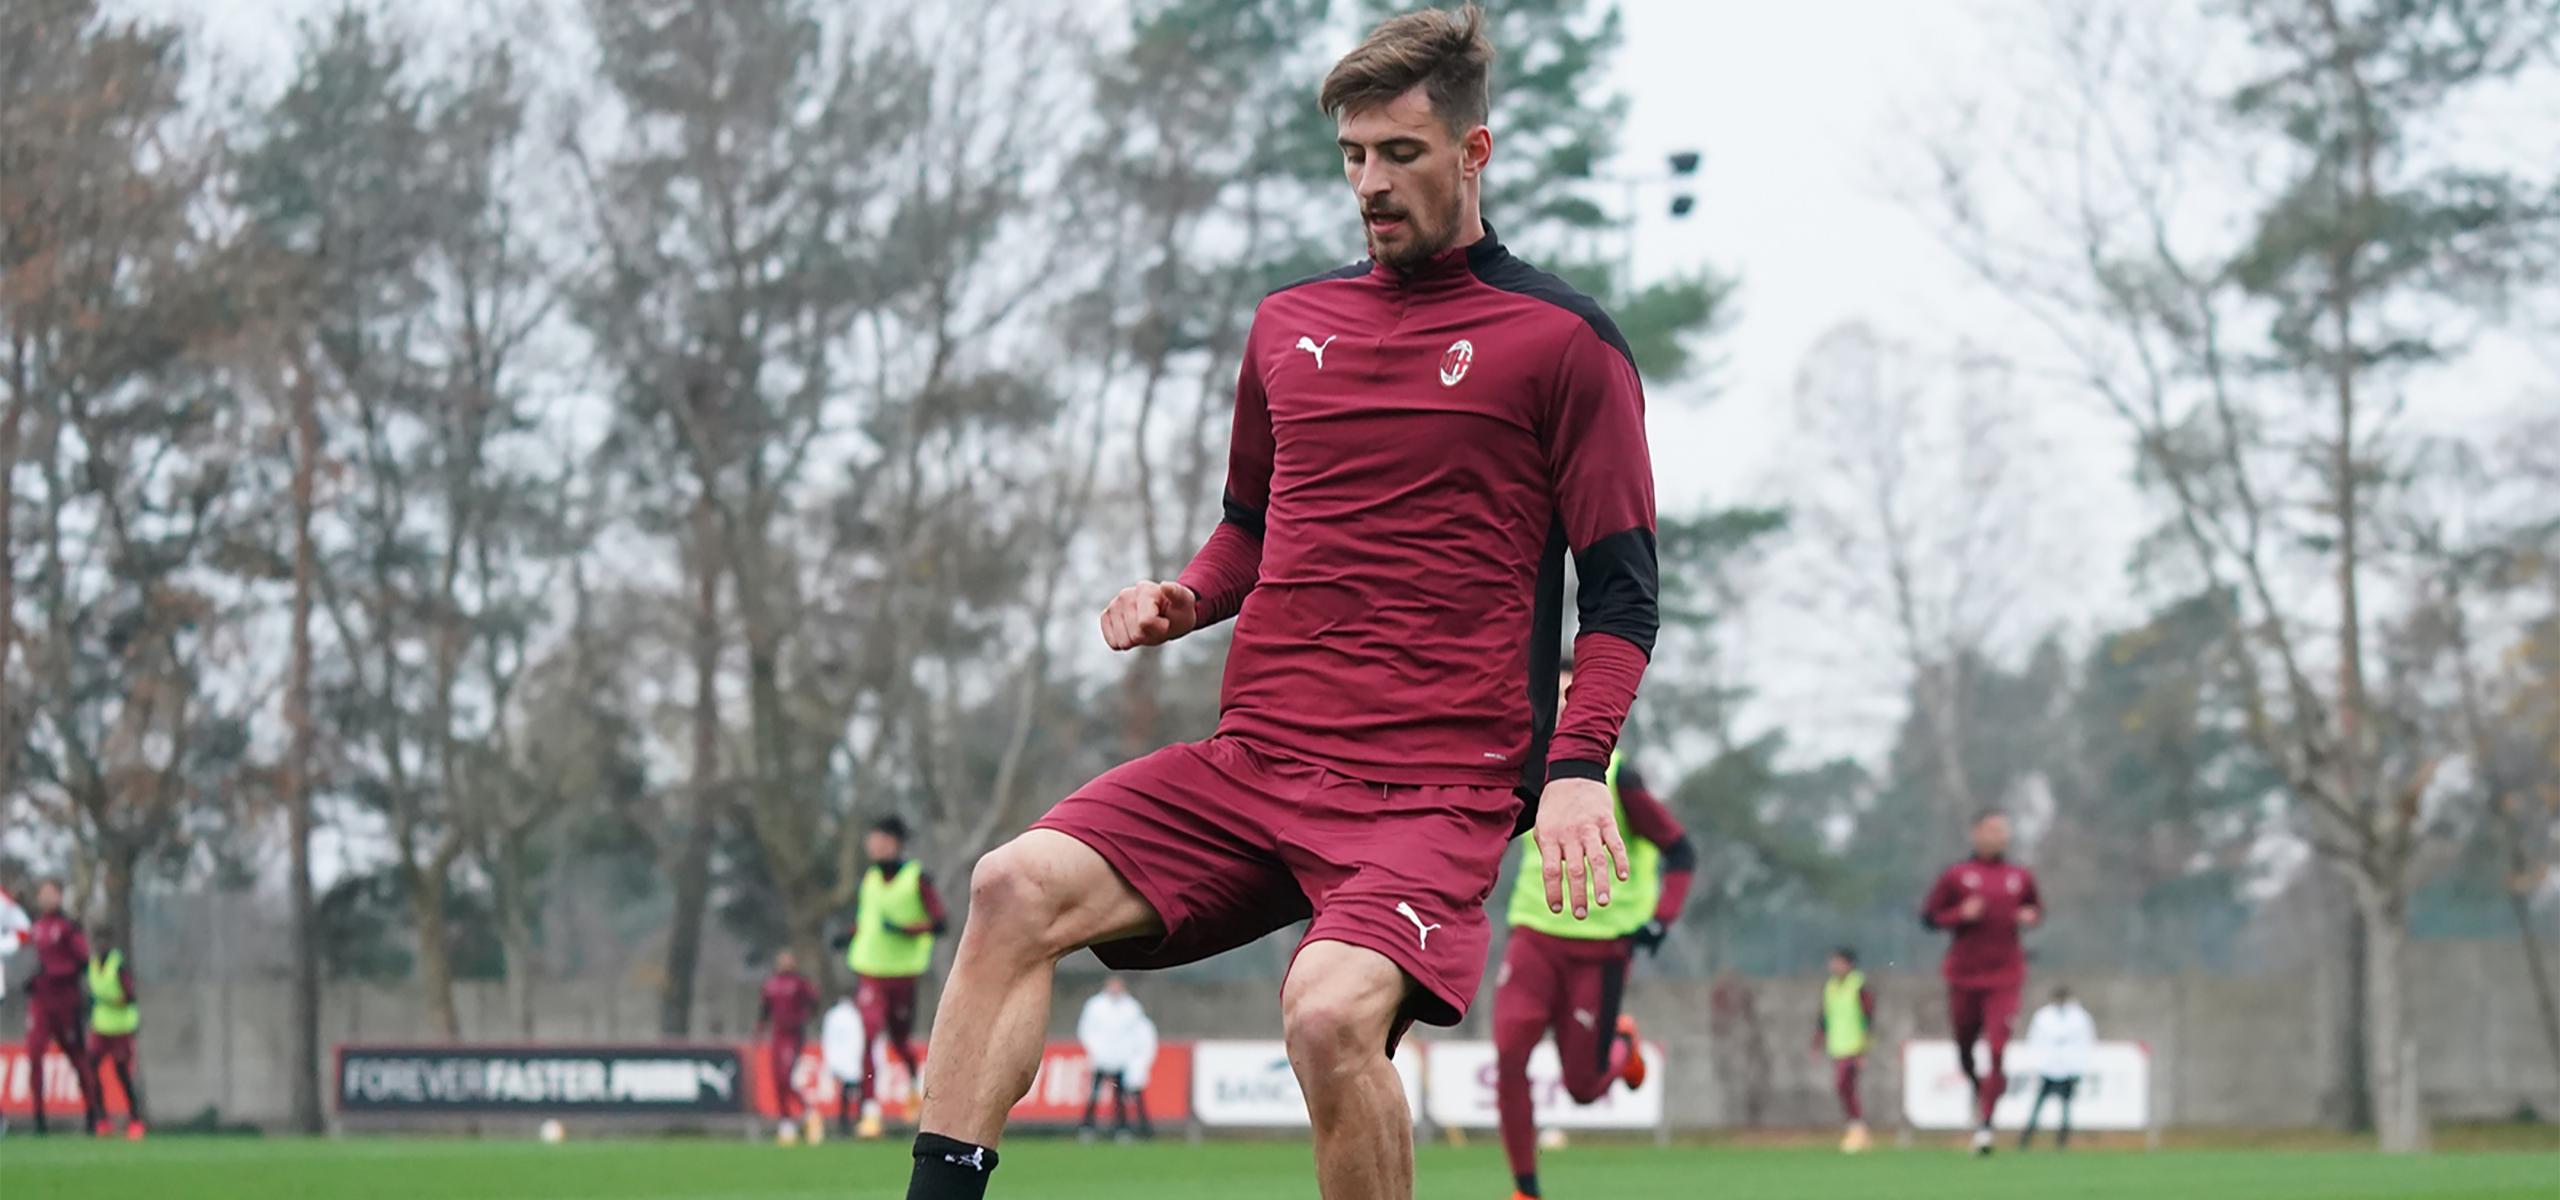 Occlusion To jump Colleague Training Report: Milanello, 1 December 2020 | AC Milan